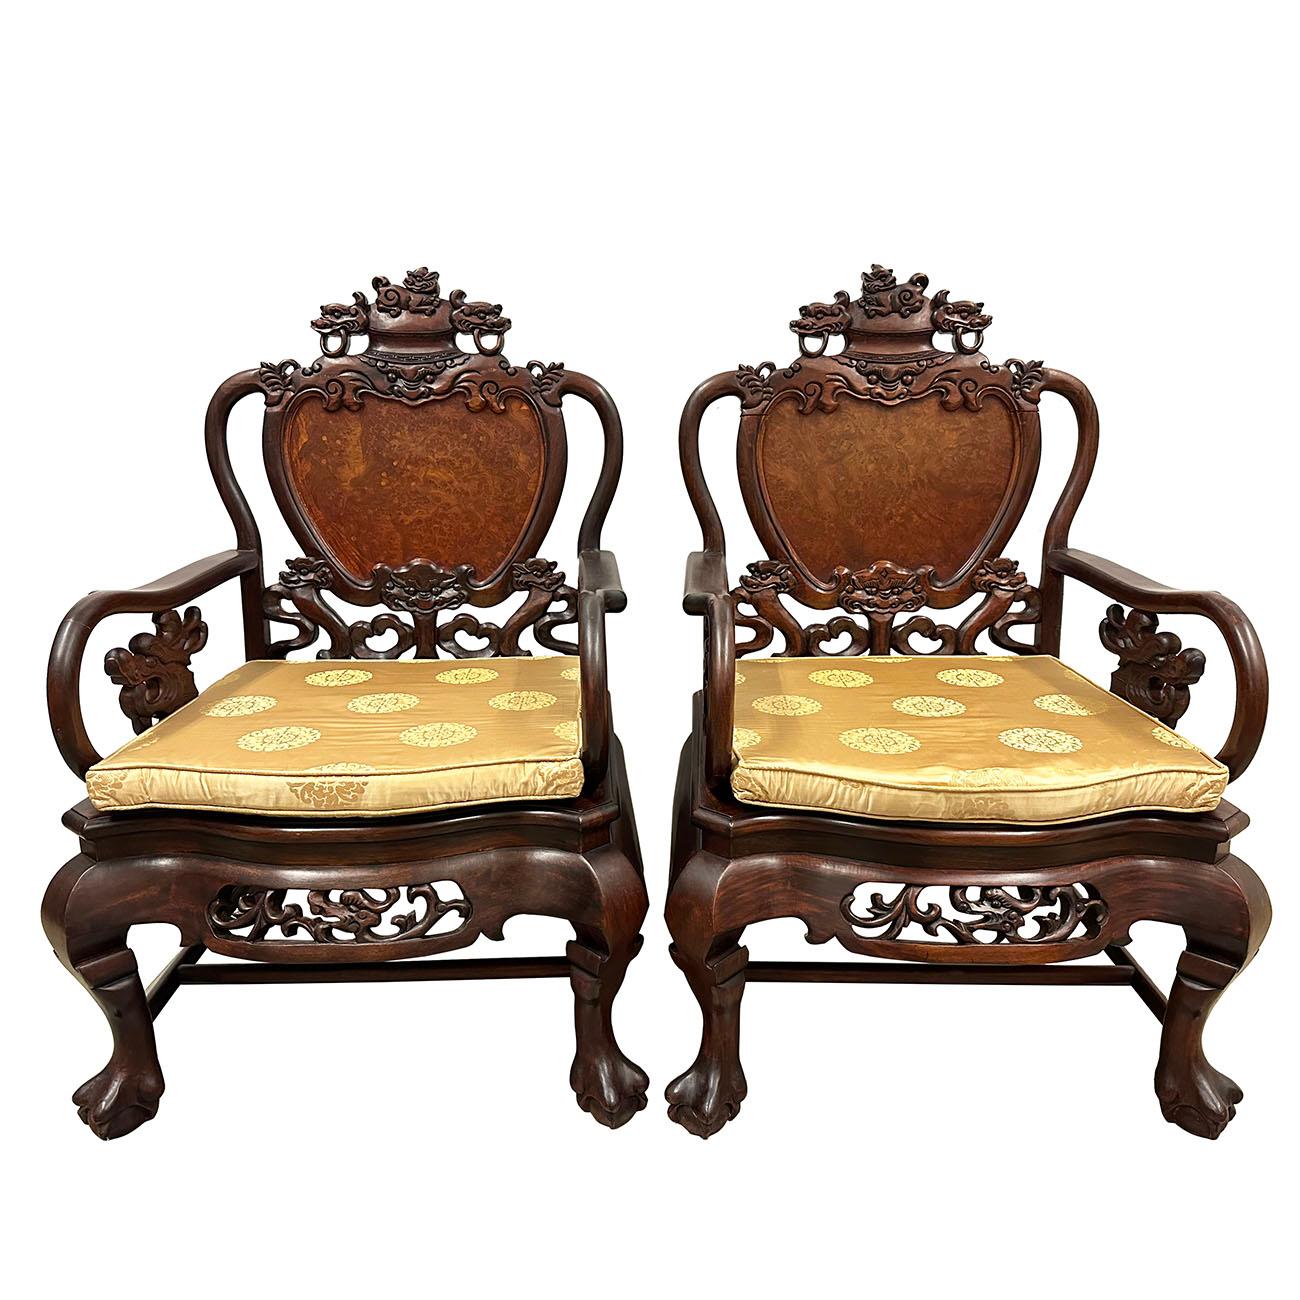 This set of gorgeous Chinese Rosewood Carved Living room Chairs and table were made during early 20th century and still maintained its original condition, very smooth to touch, full of patina. They were hand made and hand carved from solid rosewood